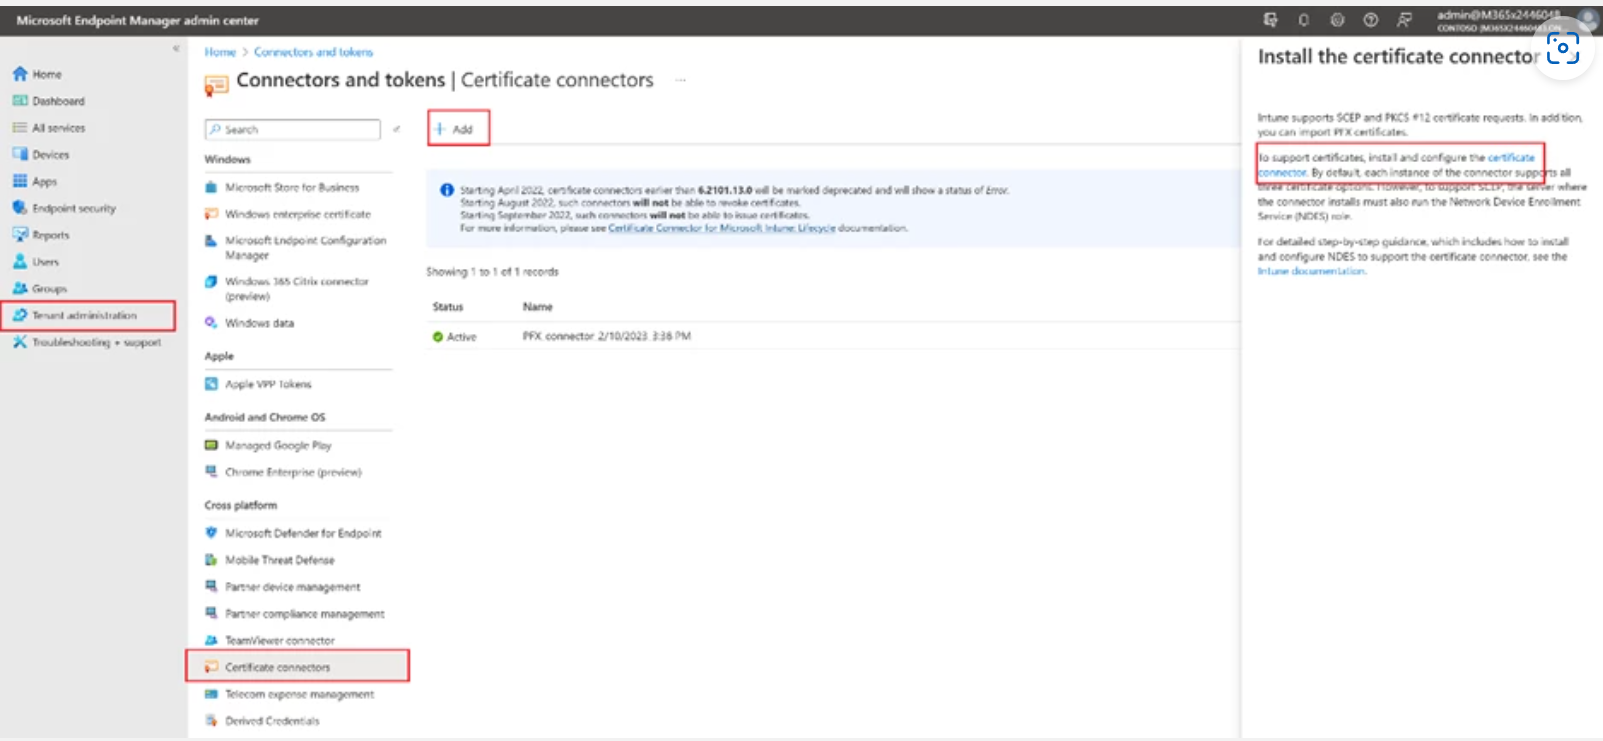 azure page for downloading IntuneCertificateConnector